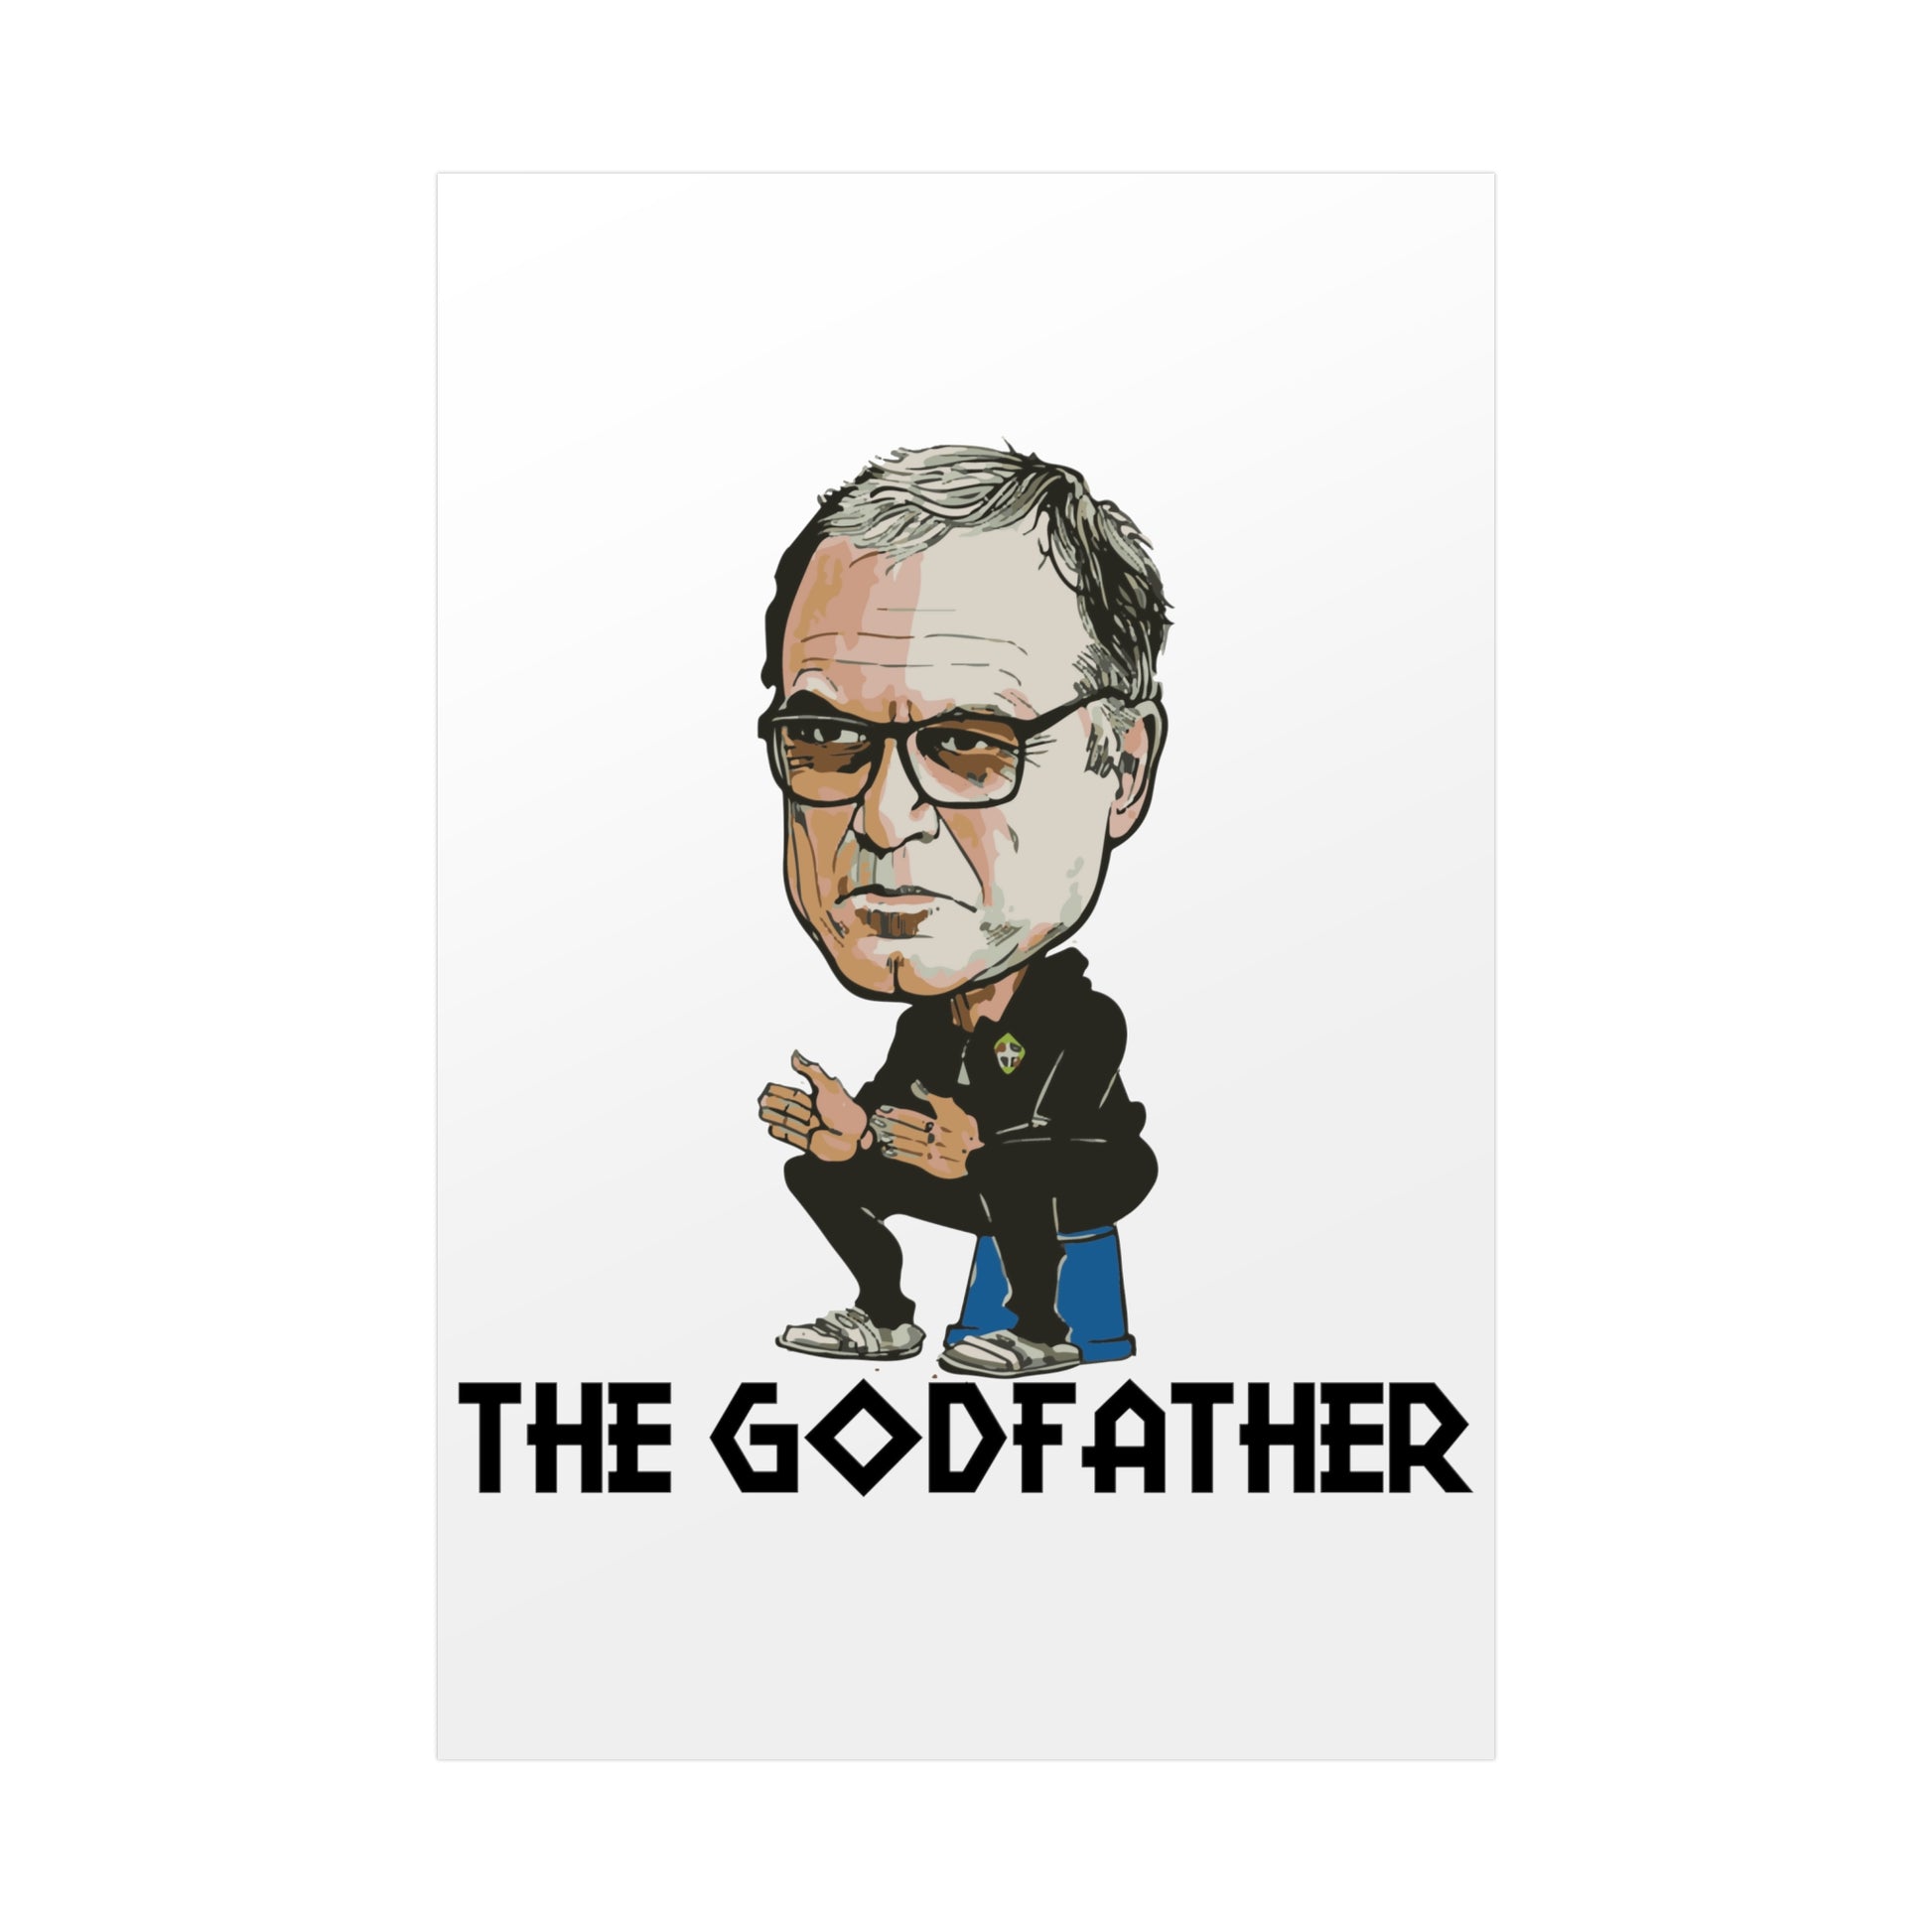 Bielsa the godfather on his bucket Poster